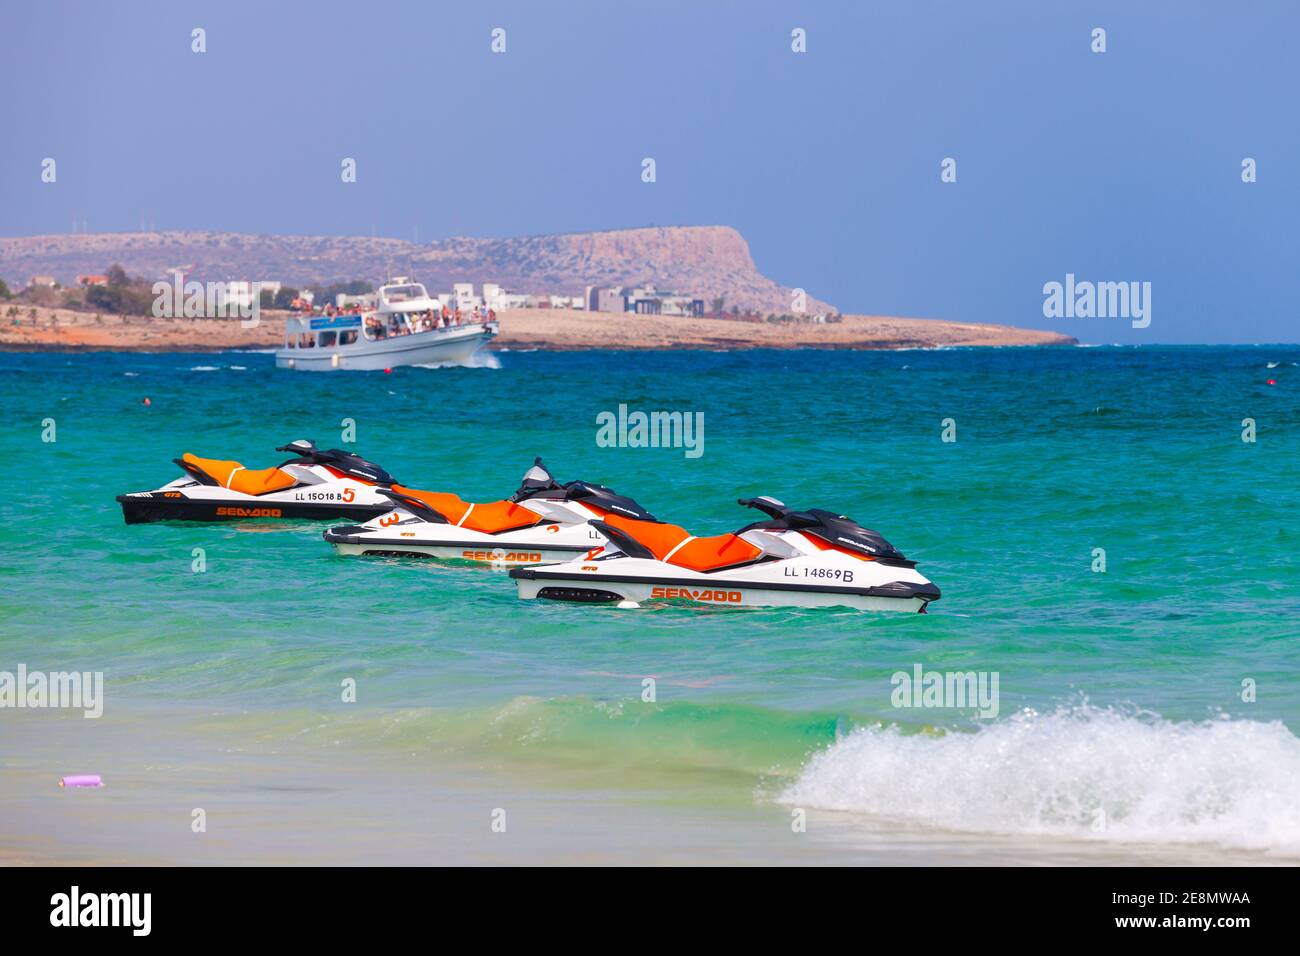 Ayia Napa, Cyprus - June 12, 2018: Few jet skis for rent are on the beach of Agia Napa Stock Photo